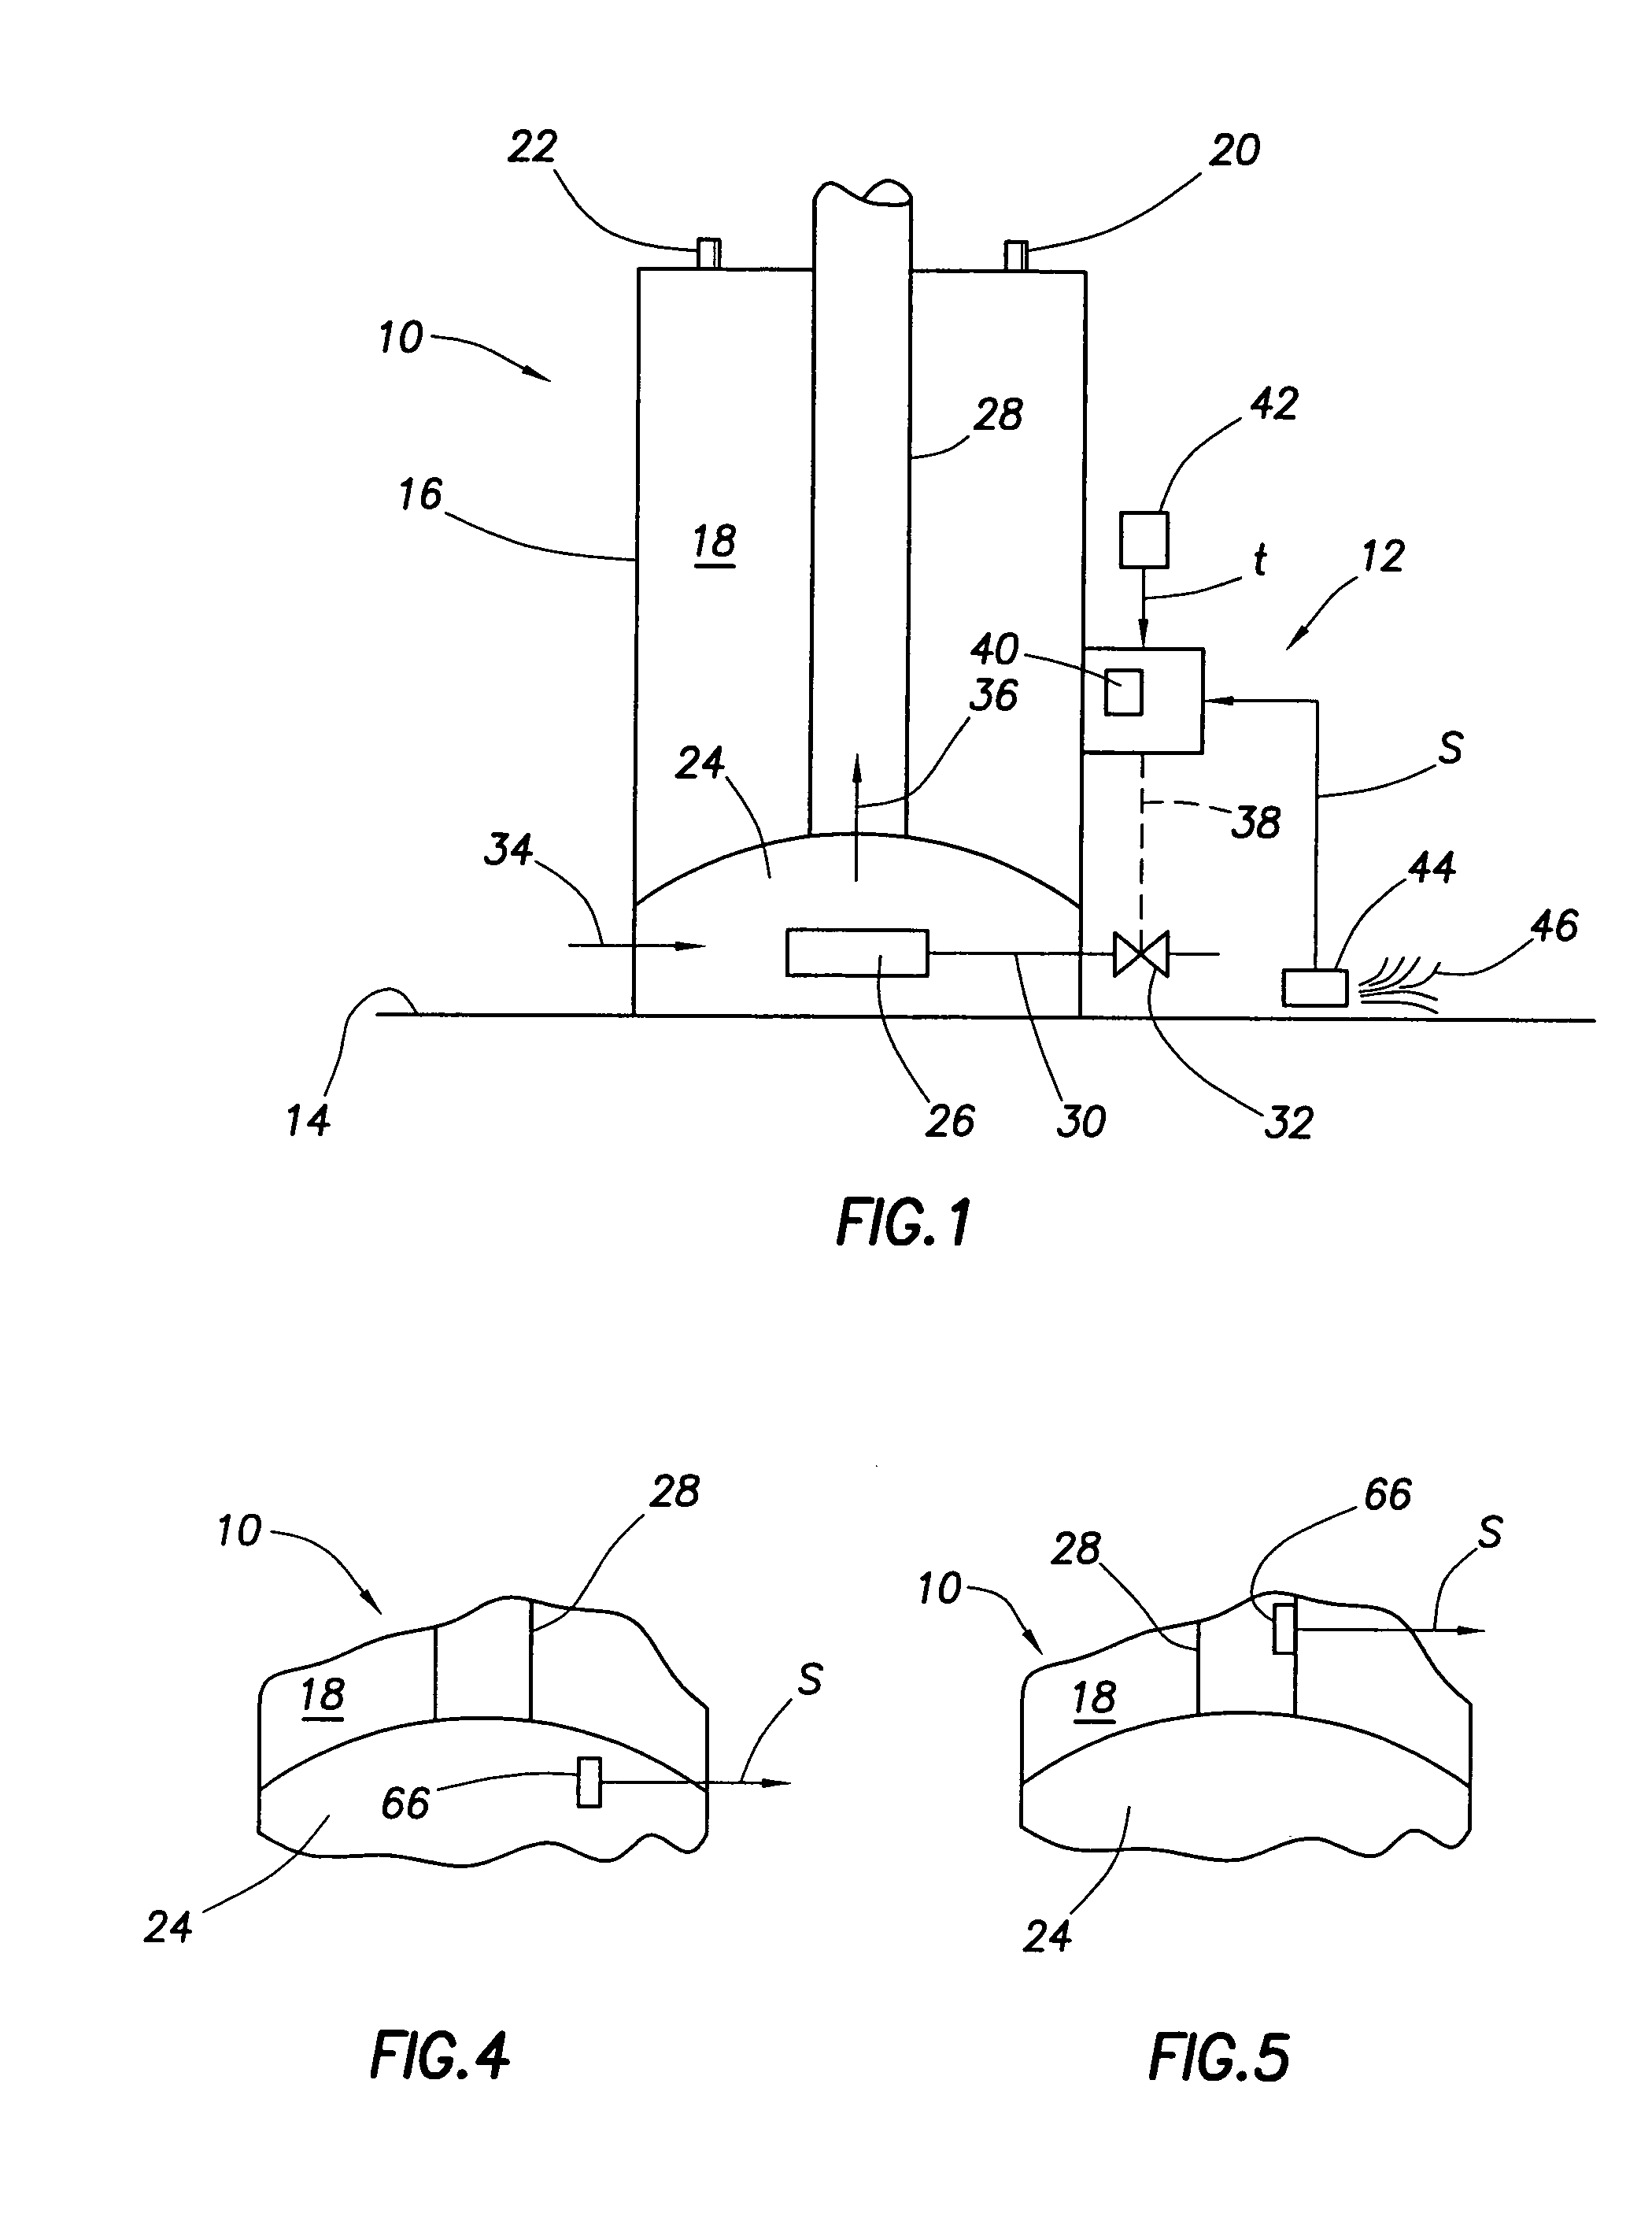 Control techniques for shut-off sensors in fuel-fired heating appliances